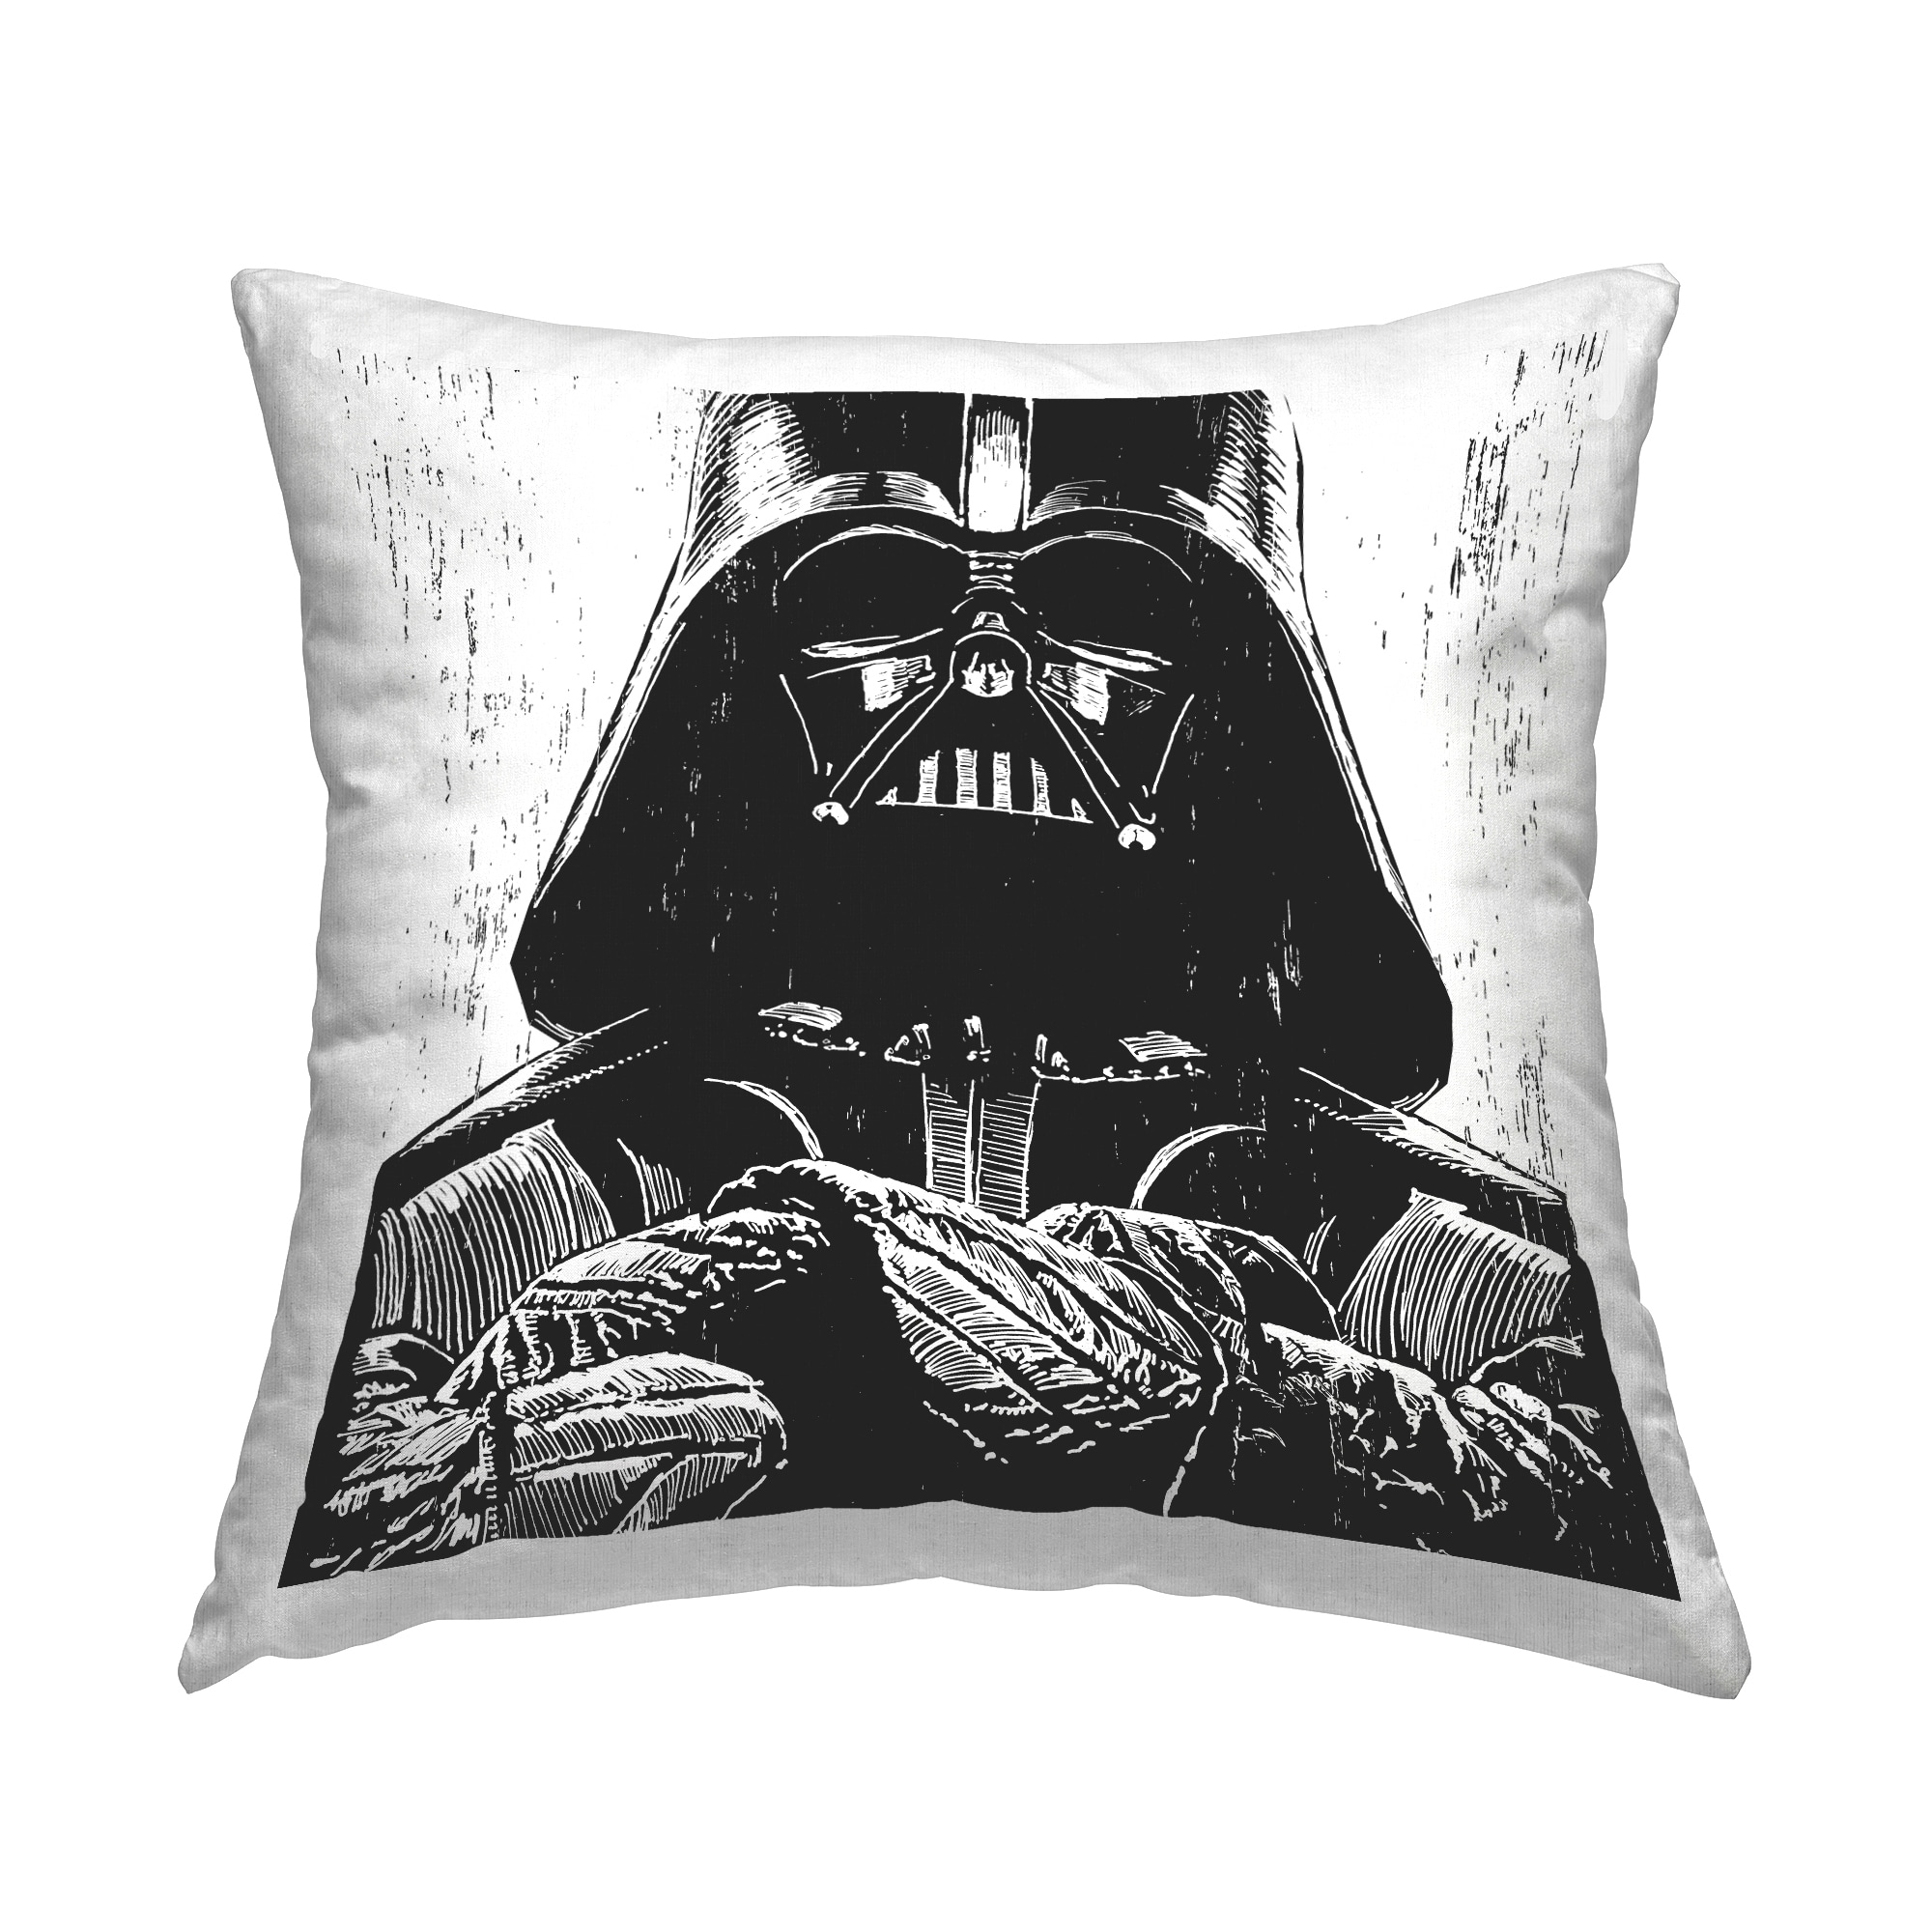 https://ak1.ostkcdn.com/images/products/is/images/direct/ed3f13871836aee38cbe995956f21039e089dce2/Stupell-Industries-Darth-Vader-Rustic-Movie-Character-Printed-Throw-Pillow-Design-by-Neil-Shigley.jpg